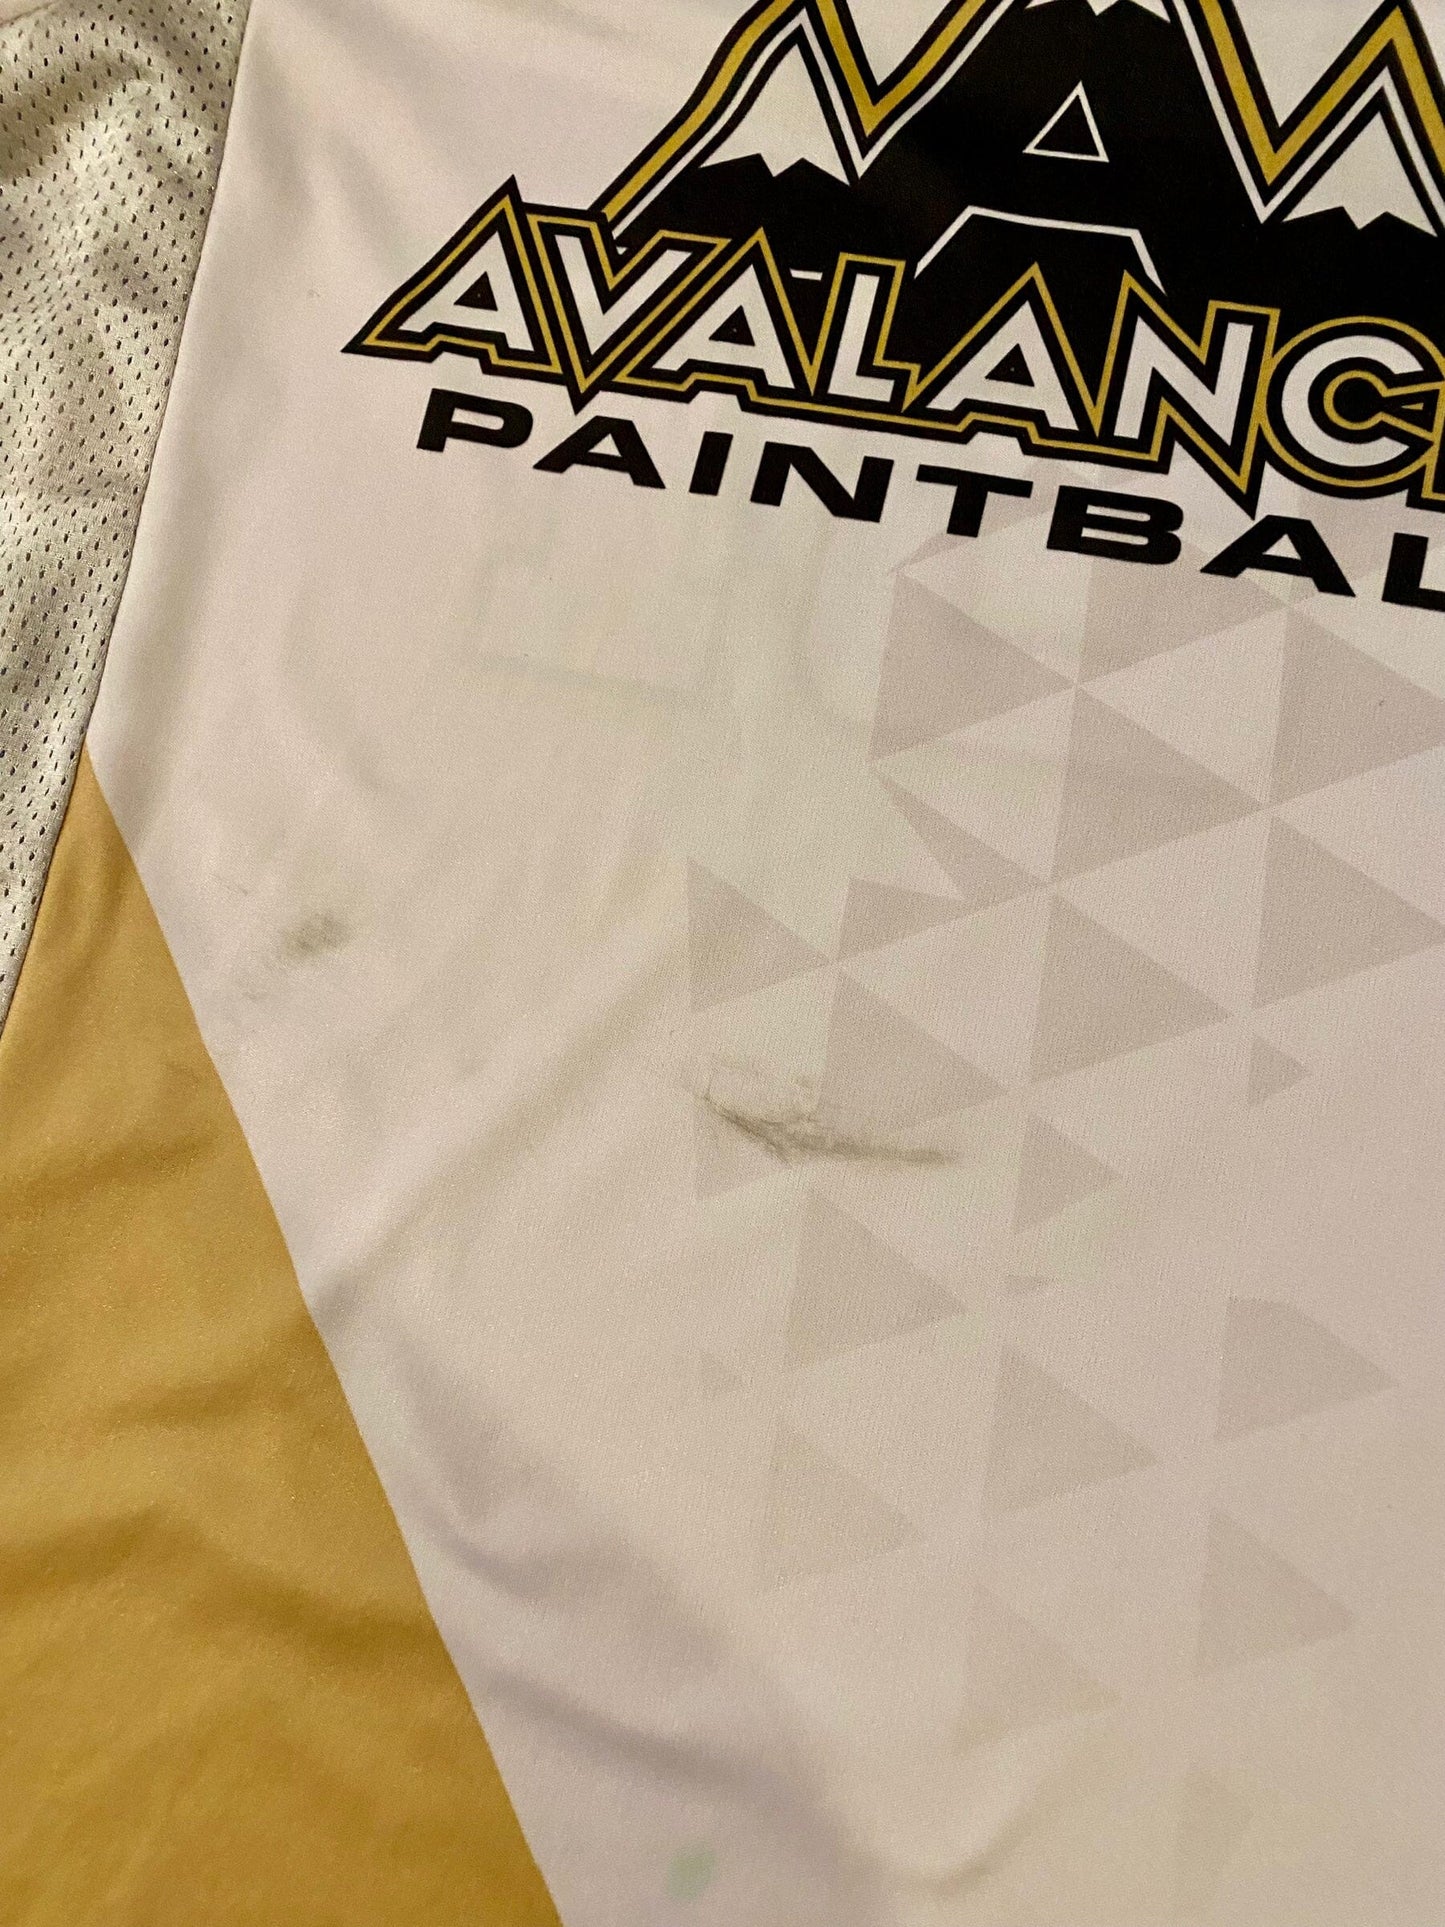 Used Avalance Paintball Jersey size Large Paintball Gun from CPXBrosPaintball Buy/Sell/Trade Paintball Markers, Paintball Hoppers, Paintball Masks, and Hormesis Headbands